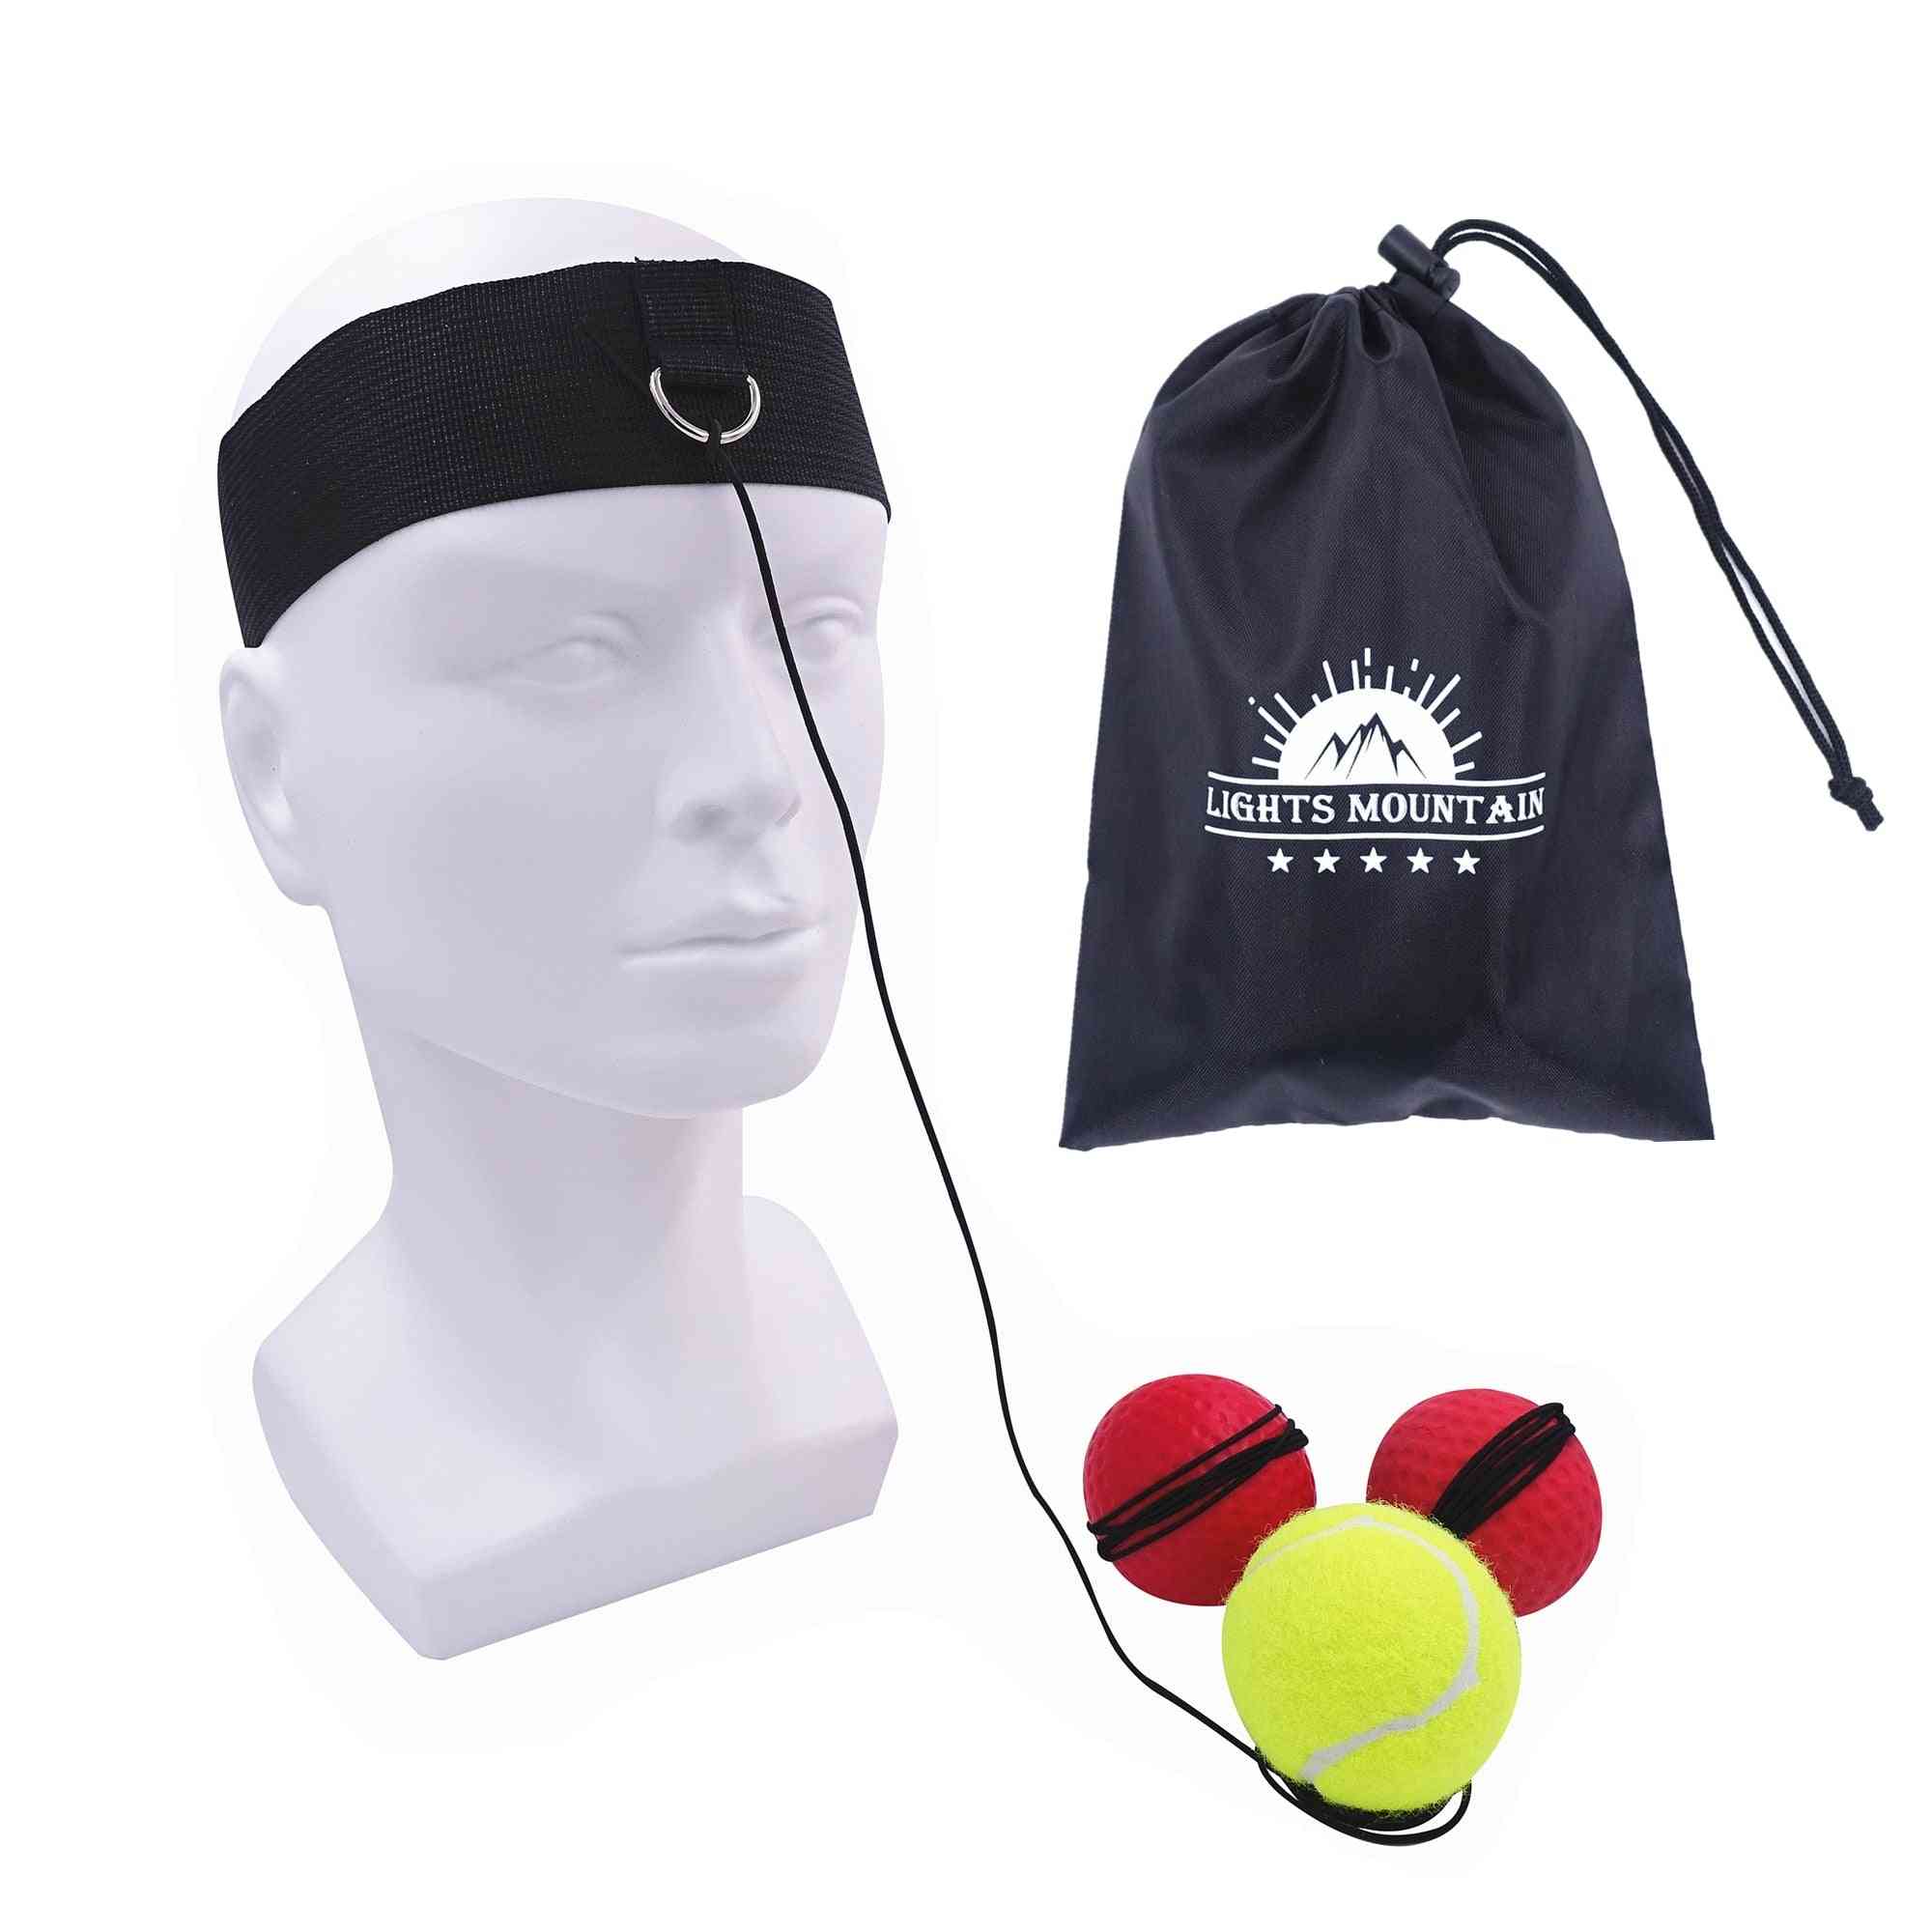 Punching Speed Reaction Agility Training Difficulty Level Boxing Balls With Adjustable Headband